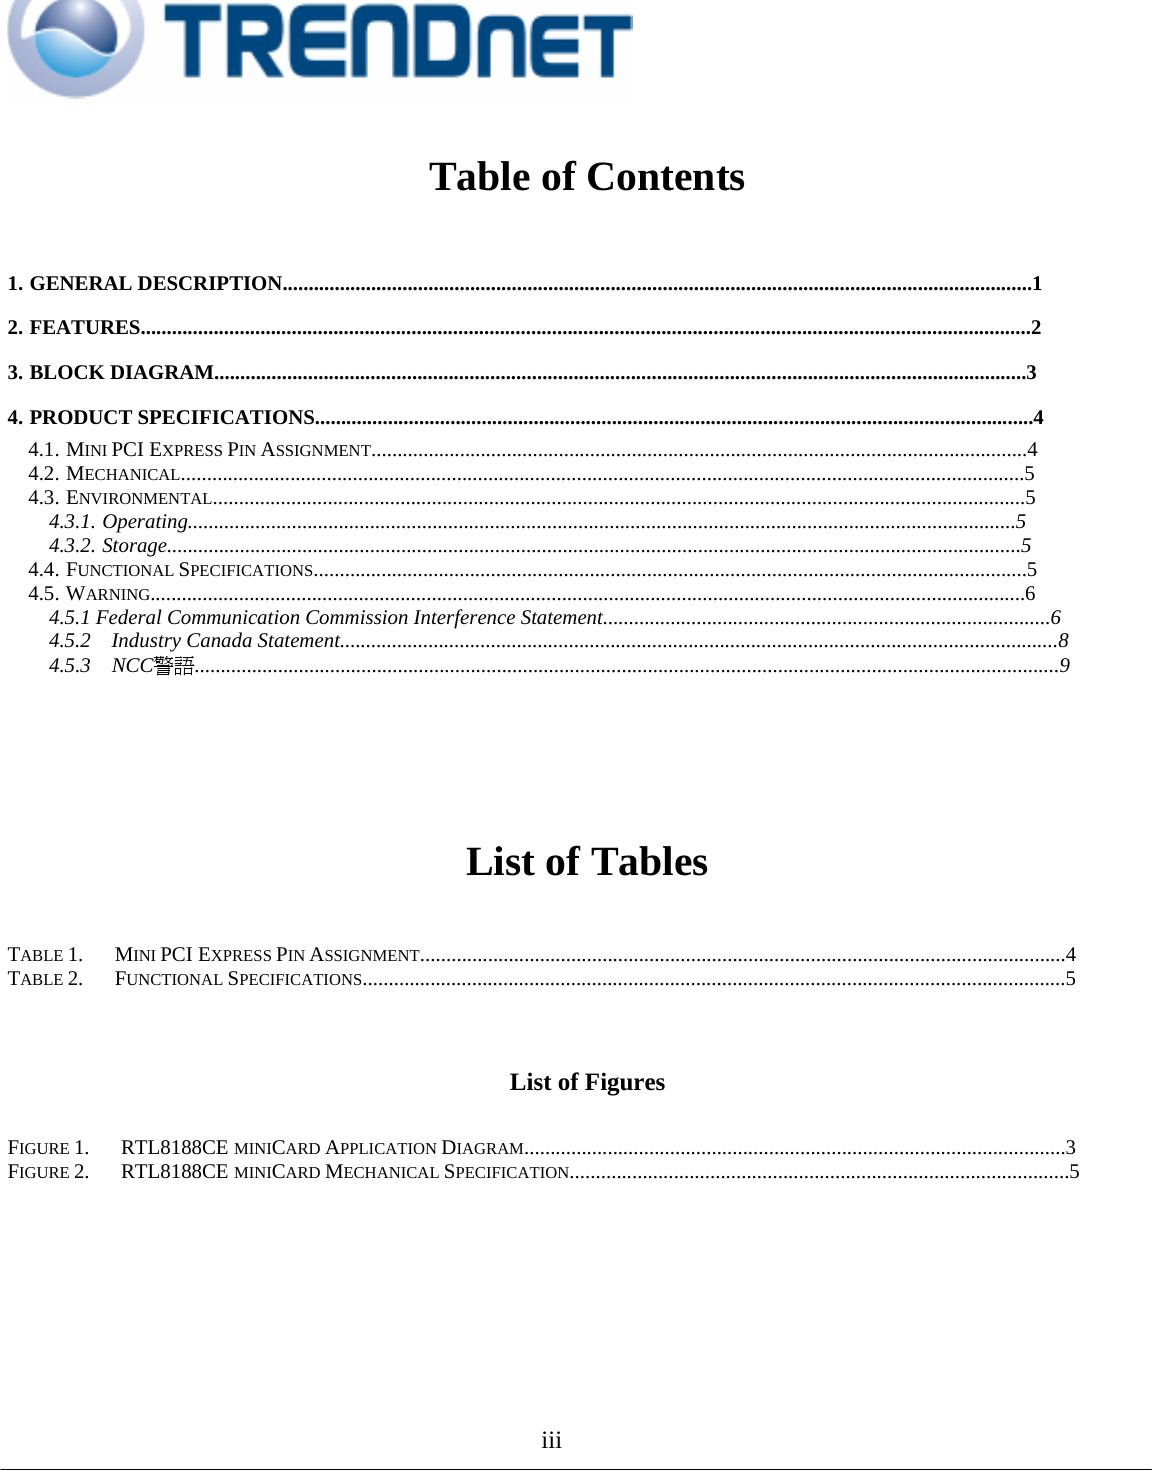                                                                                                                                           Table of Contents    1. GENERAL DESCRIPTION................................................................................................................................................1  2. FEATURES...........................................................................................................................................................................2  3. BLOCK DIAGRAM............................................................................................................................................................3  4. PRODUCT SPECIFICATIONS..........................................................................................................................................4  4.1. MINI PCI EXPRESS PIN ASSIGNMENT..............................................................................................................................4  4.2. MECHANICAL..................................................................................................................................................................5  4.3. ENVIRONMENTAL............................................................................................................................................................5  4.3.1. Operating...............................................................................................................................................................5  4.3.2. Storage....................................................................................................................................................................5  4.4. FUNCTIONAL SPECIFICATIONS.........................................................................................................................................5  4.5. WARNING........................................................................................................................................................................6  4.5.1 Federal Communication Commission Interference Statement......................................................................................6  4.5.2  Industry Canada Statement..........................................................................................................................................8  4.5.3  NCC警語......................................................................................................................................................................9        List of Tables    TABLE 1.   MINI PCI EXPRESS PIN ASSIGNMENT............................................................................................................................4  TABLE 2.   FUNCTIONAL SPECIFICATIONS.......................................................................................................................................5    List of Figures    FIGURE 1.   RTL8188CE MINICARD APPLICATION DIAGRAM........................................................................................................3  FIGURE 2.   RTL8188CE MINICARD MECHANICAL SPECIFICATION................................................................................................5               iii     